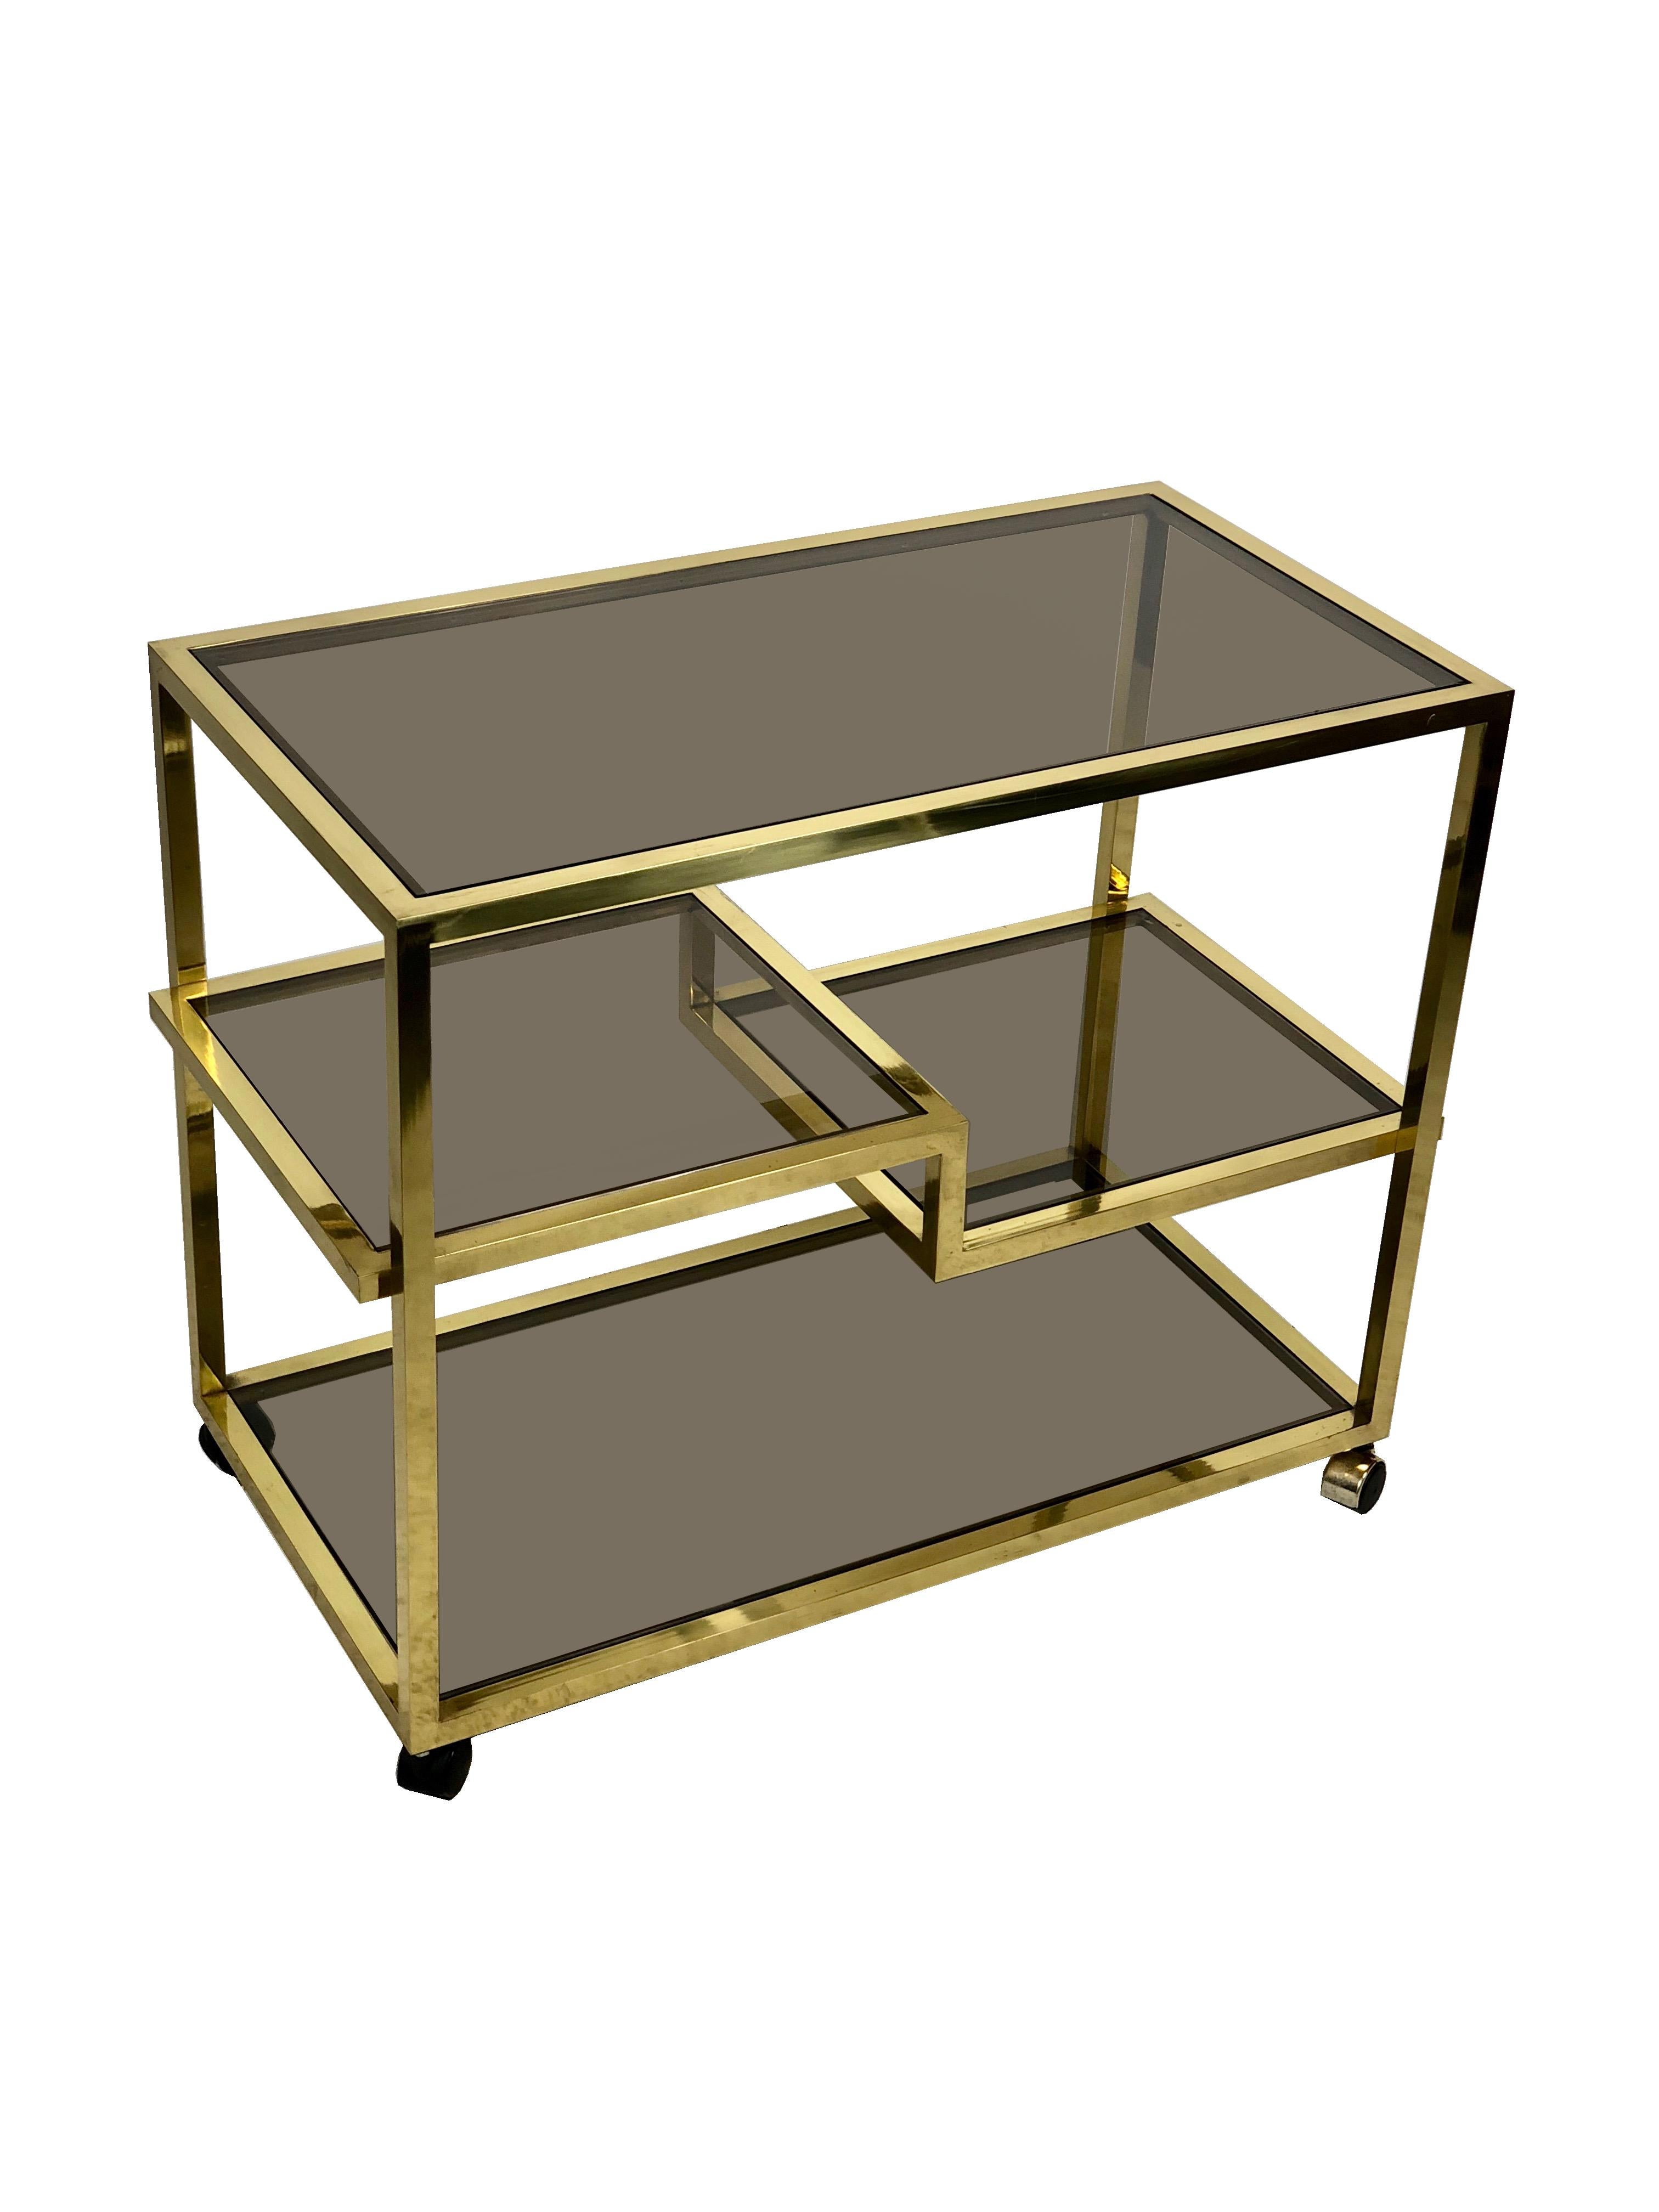 Italian Brass and Four Tiers Smoked Glass Serving Bar Cart, Italy, 1960s Romeo Rega